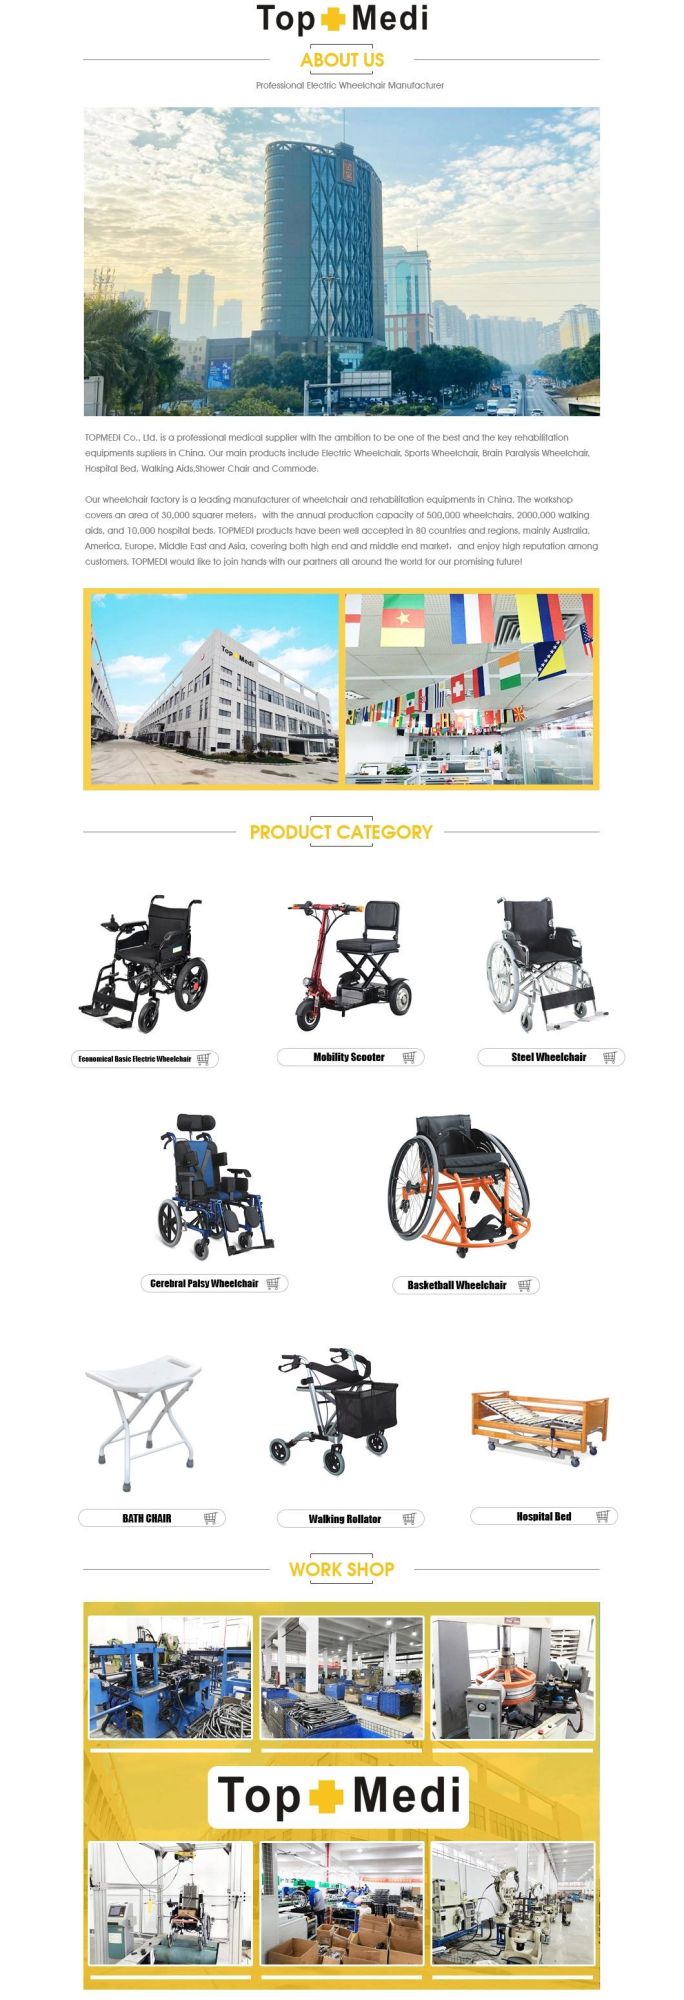 Multifunction Mover Transfer Commode Wheelchair